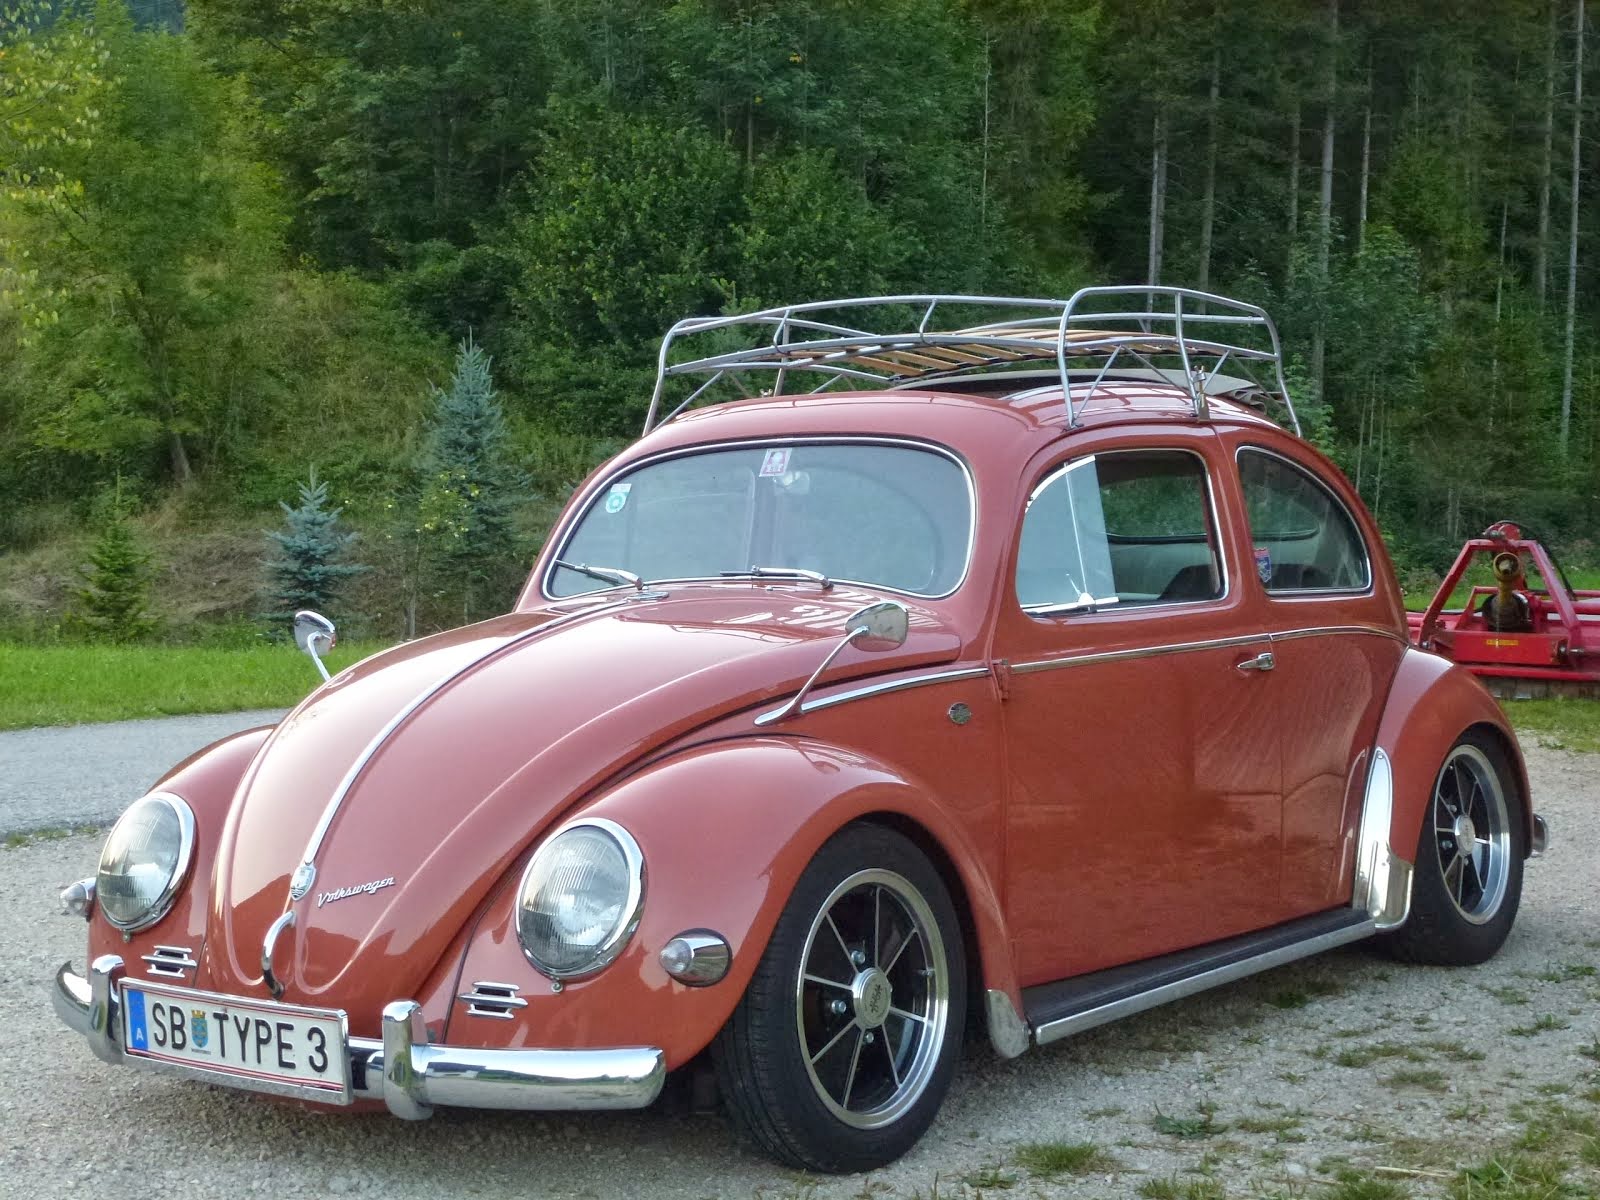 my ex oval coral red 1955 Export bug